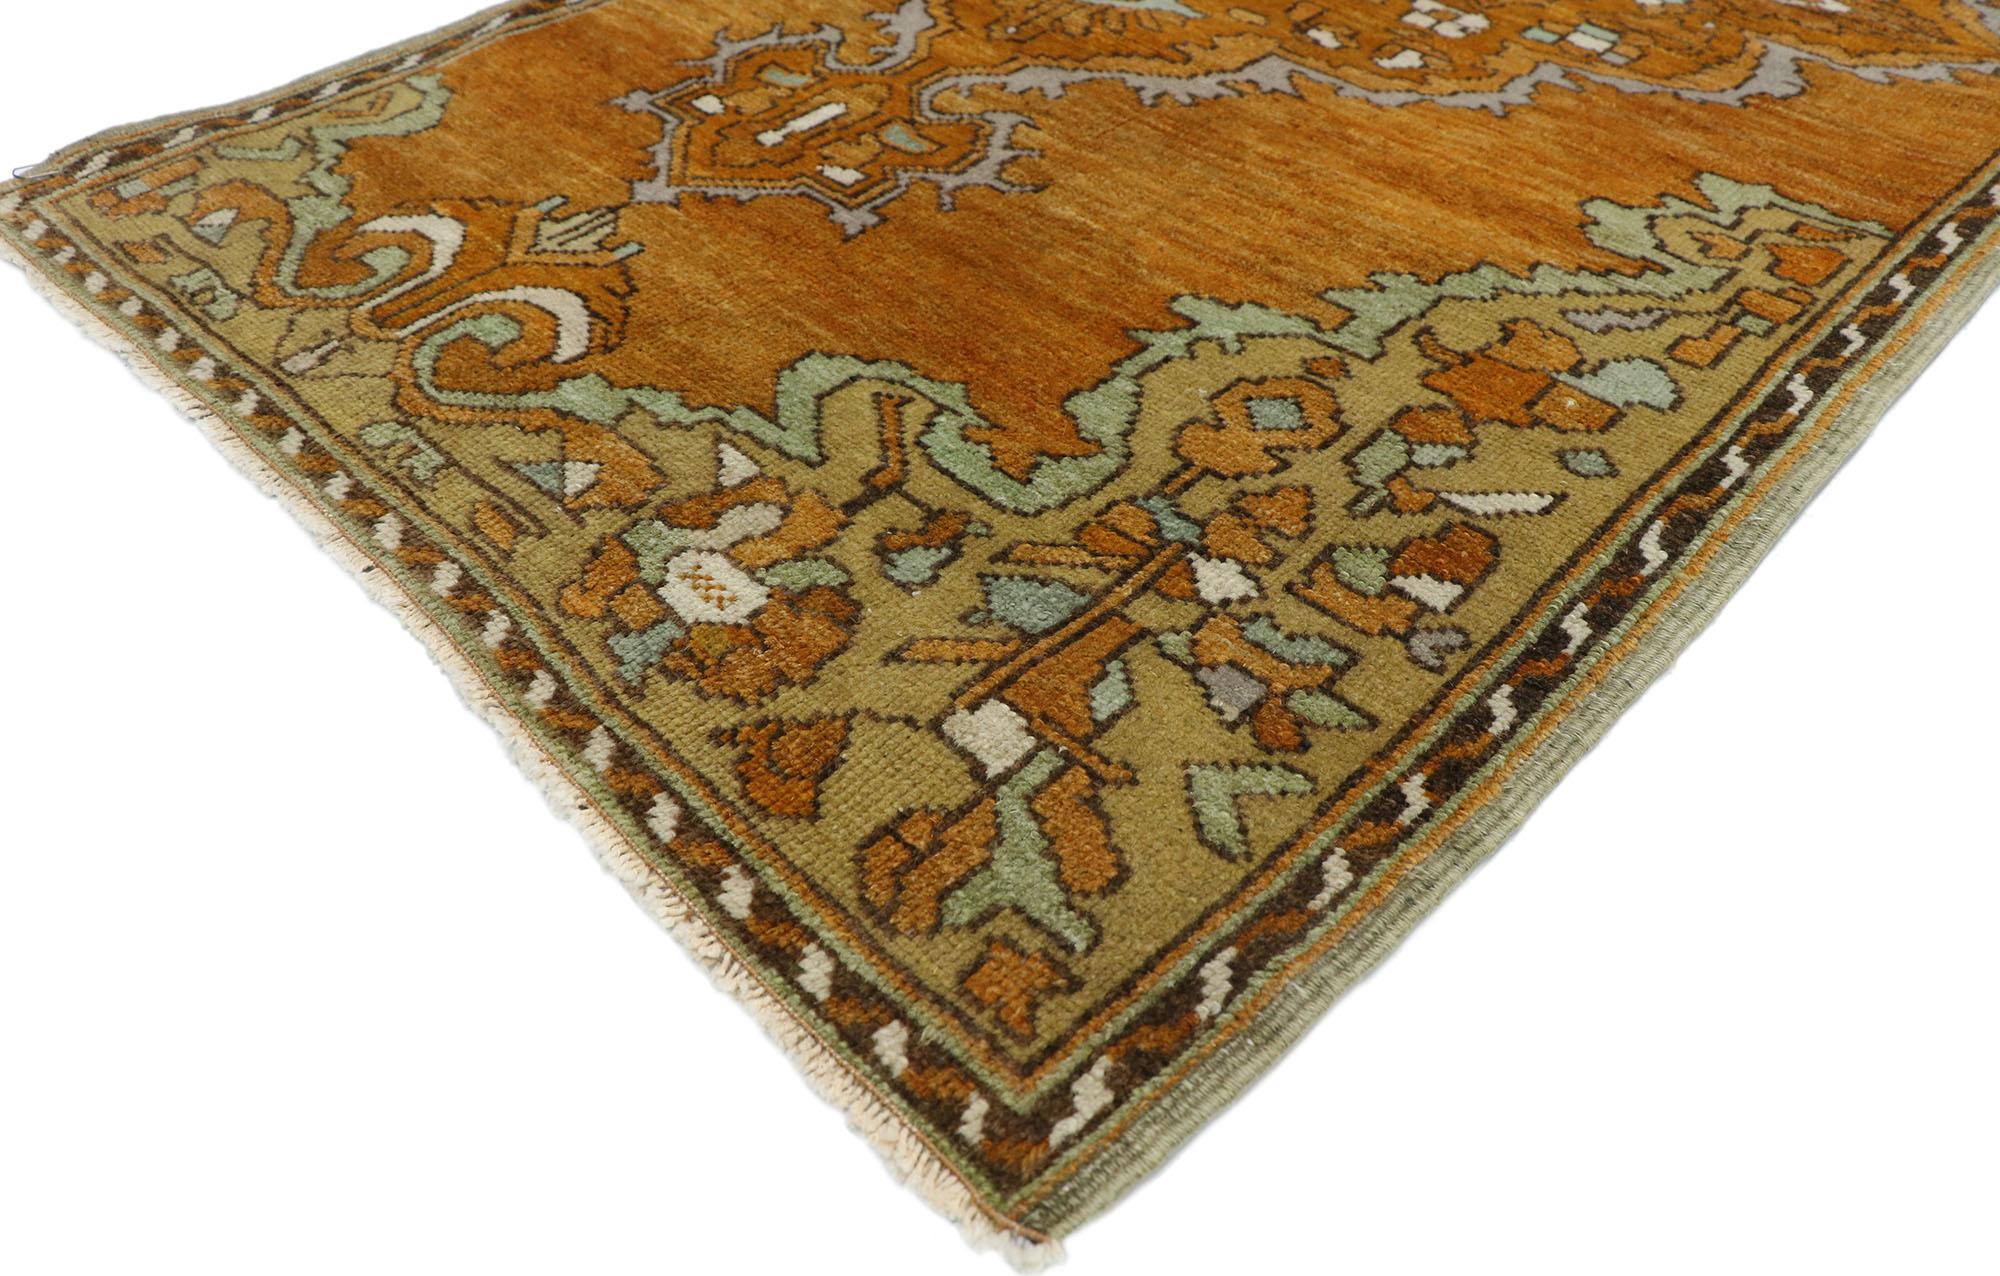 52761, vintage Turkish Oushak rug with Rustic Arts & Crafts style, Scatter rug. Balancing a timeless design with a romantic rustic sensibility, this hand knotted wool vintage Turkish Oushak scatter rug beautifully embodies Arts & Crafts style. It